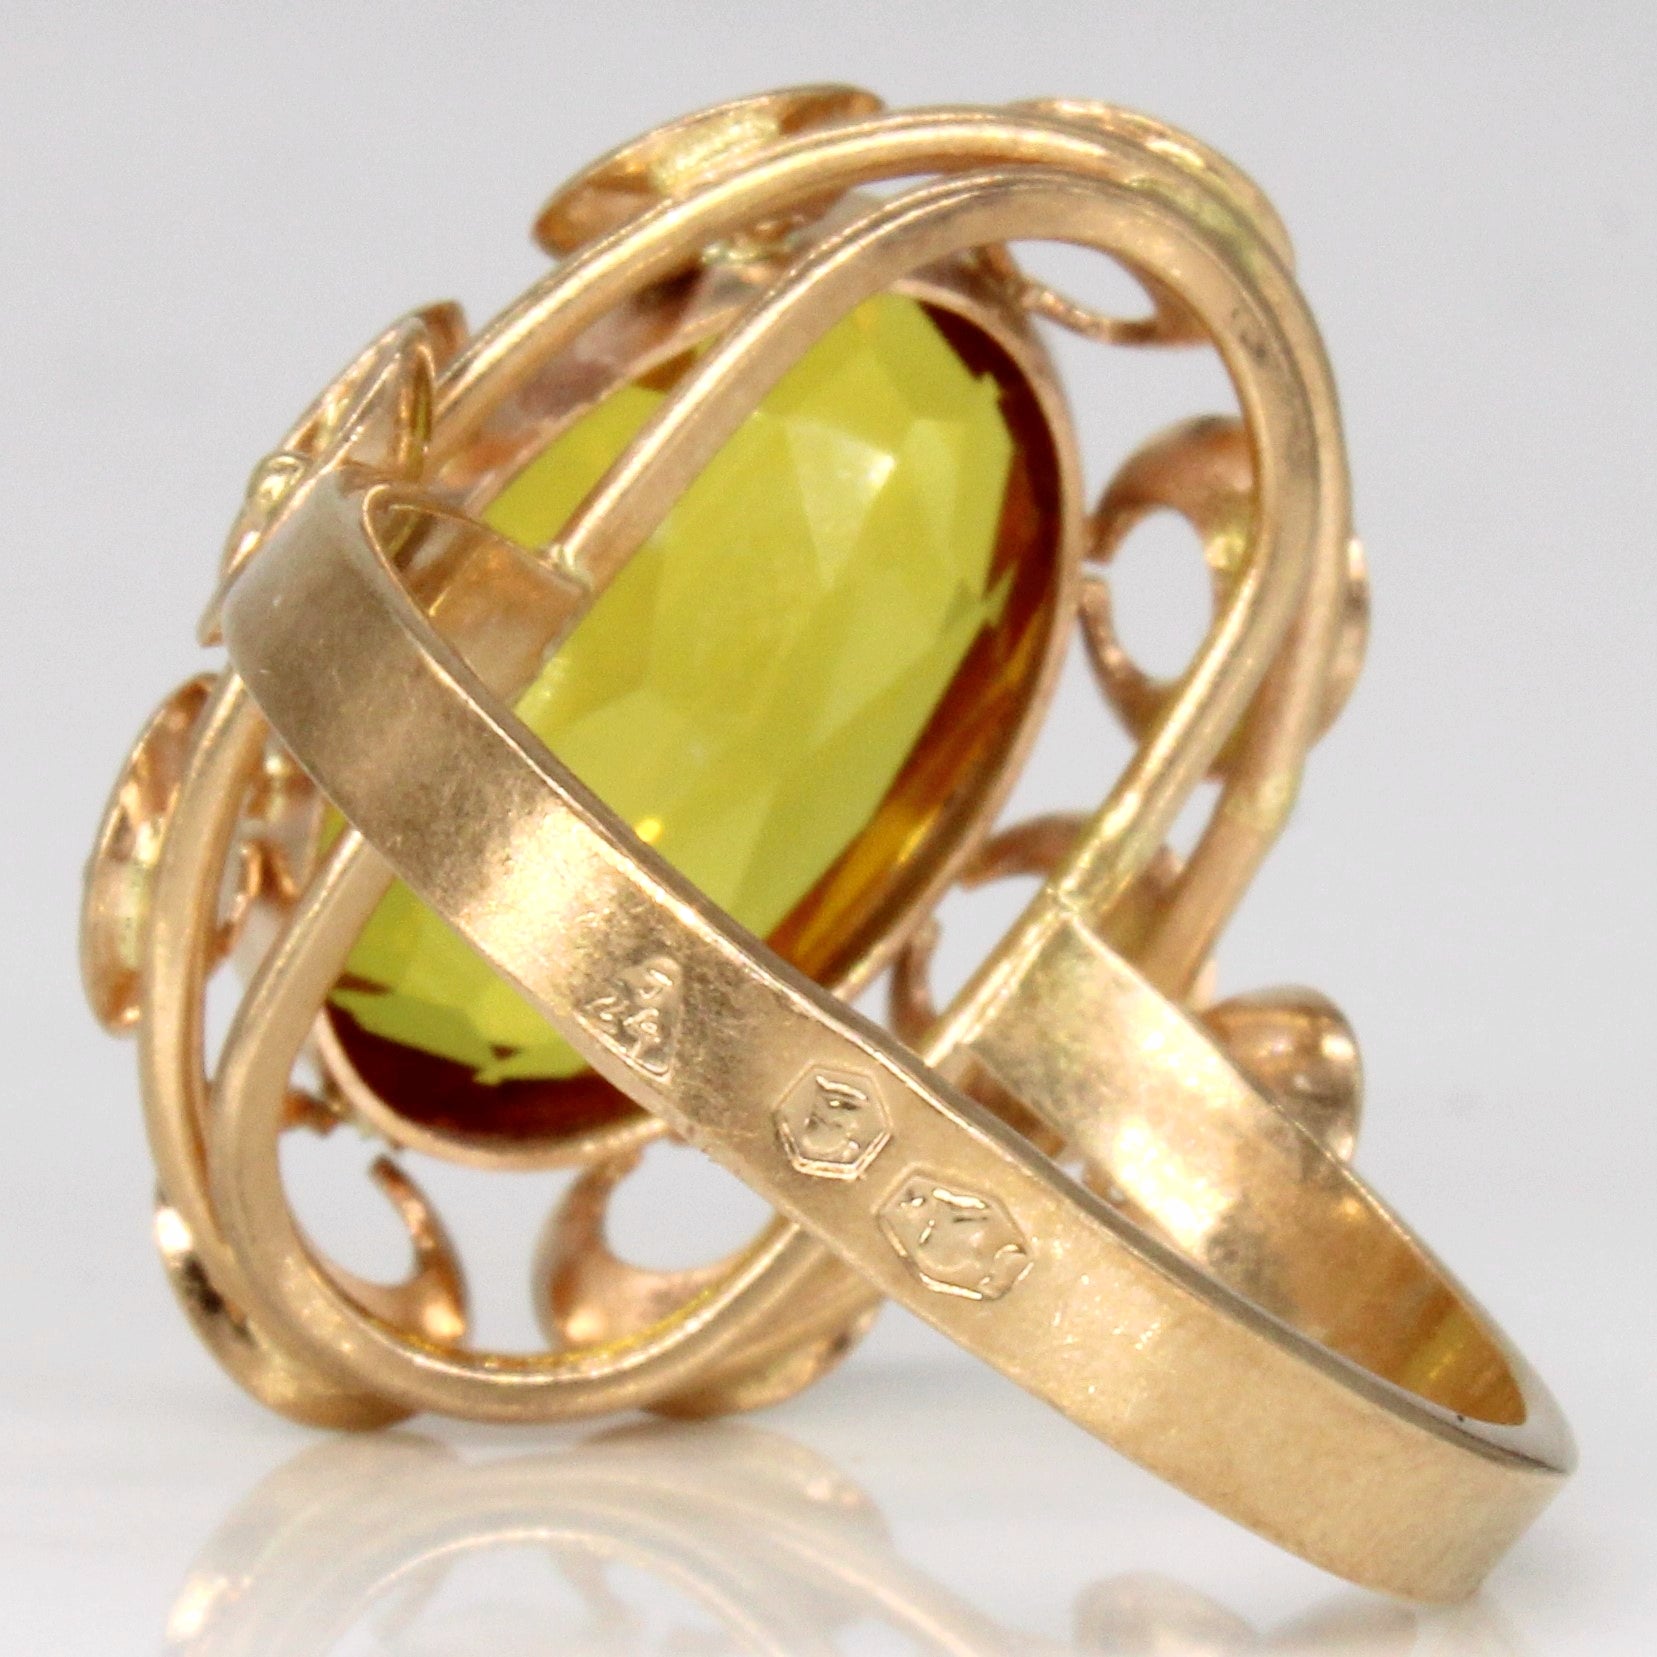 Synthetic Yellow Sapphire Cocktail Ring | 7.10ct | SZ 9.25 |